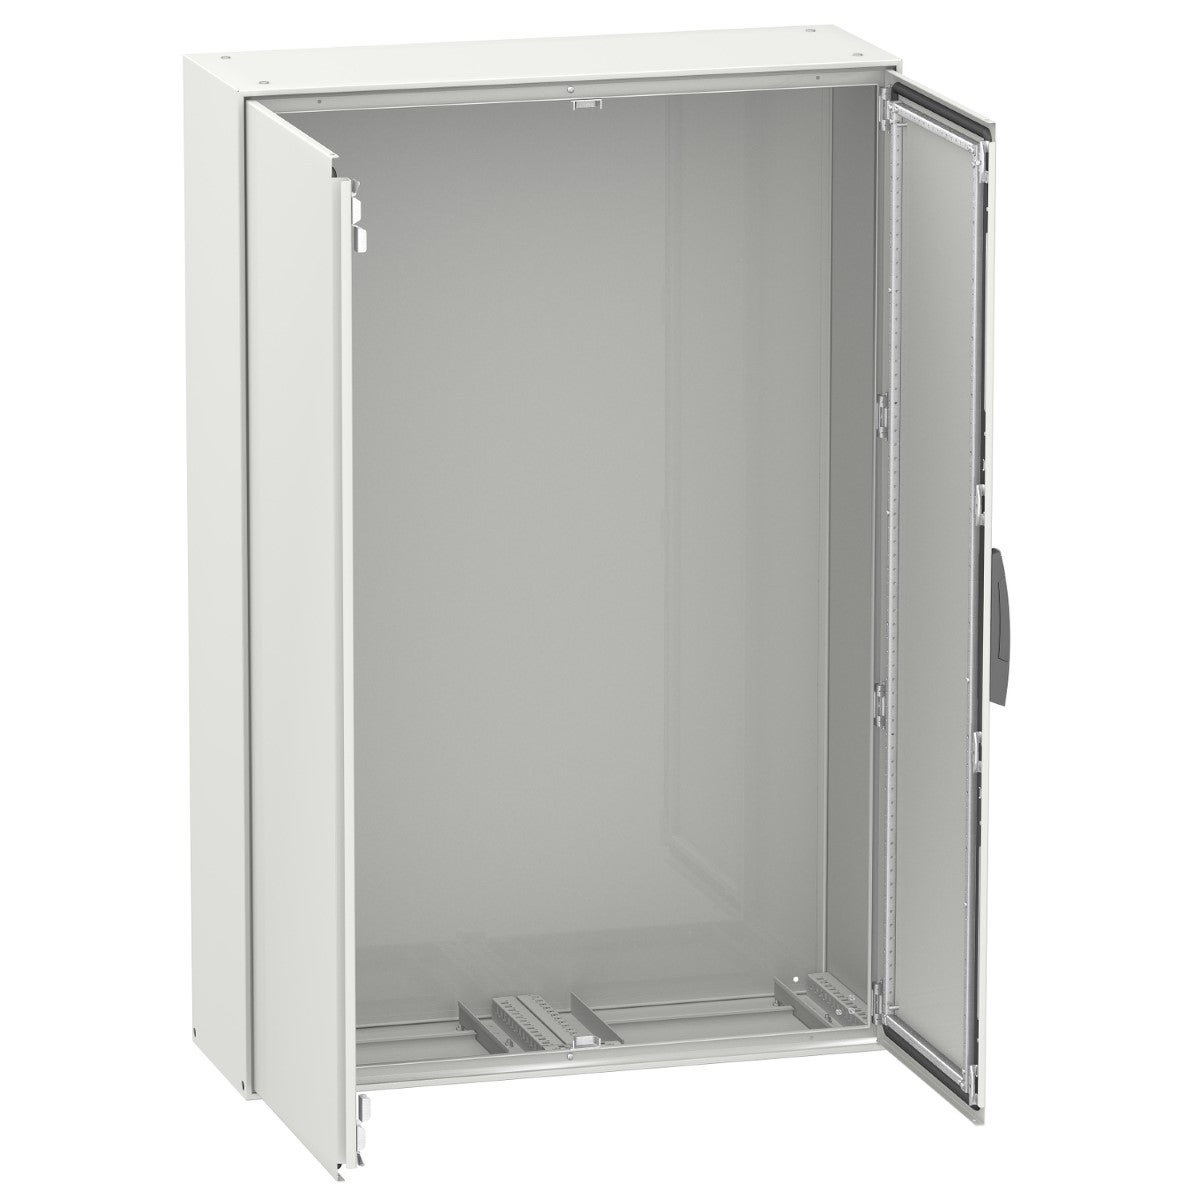 Spacial SM compact enclosure with mounting plate - 2000x1200x600 mm